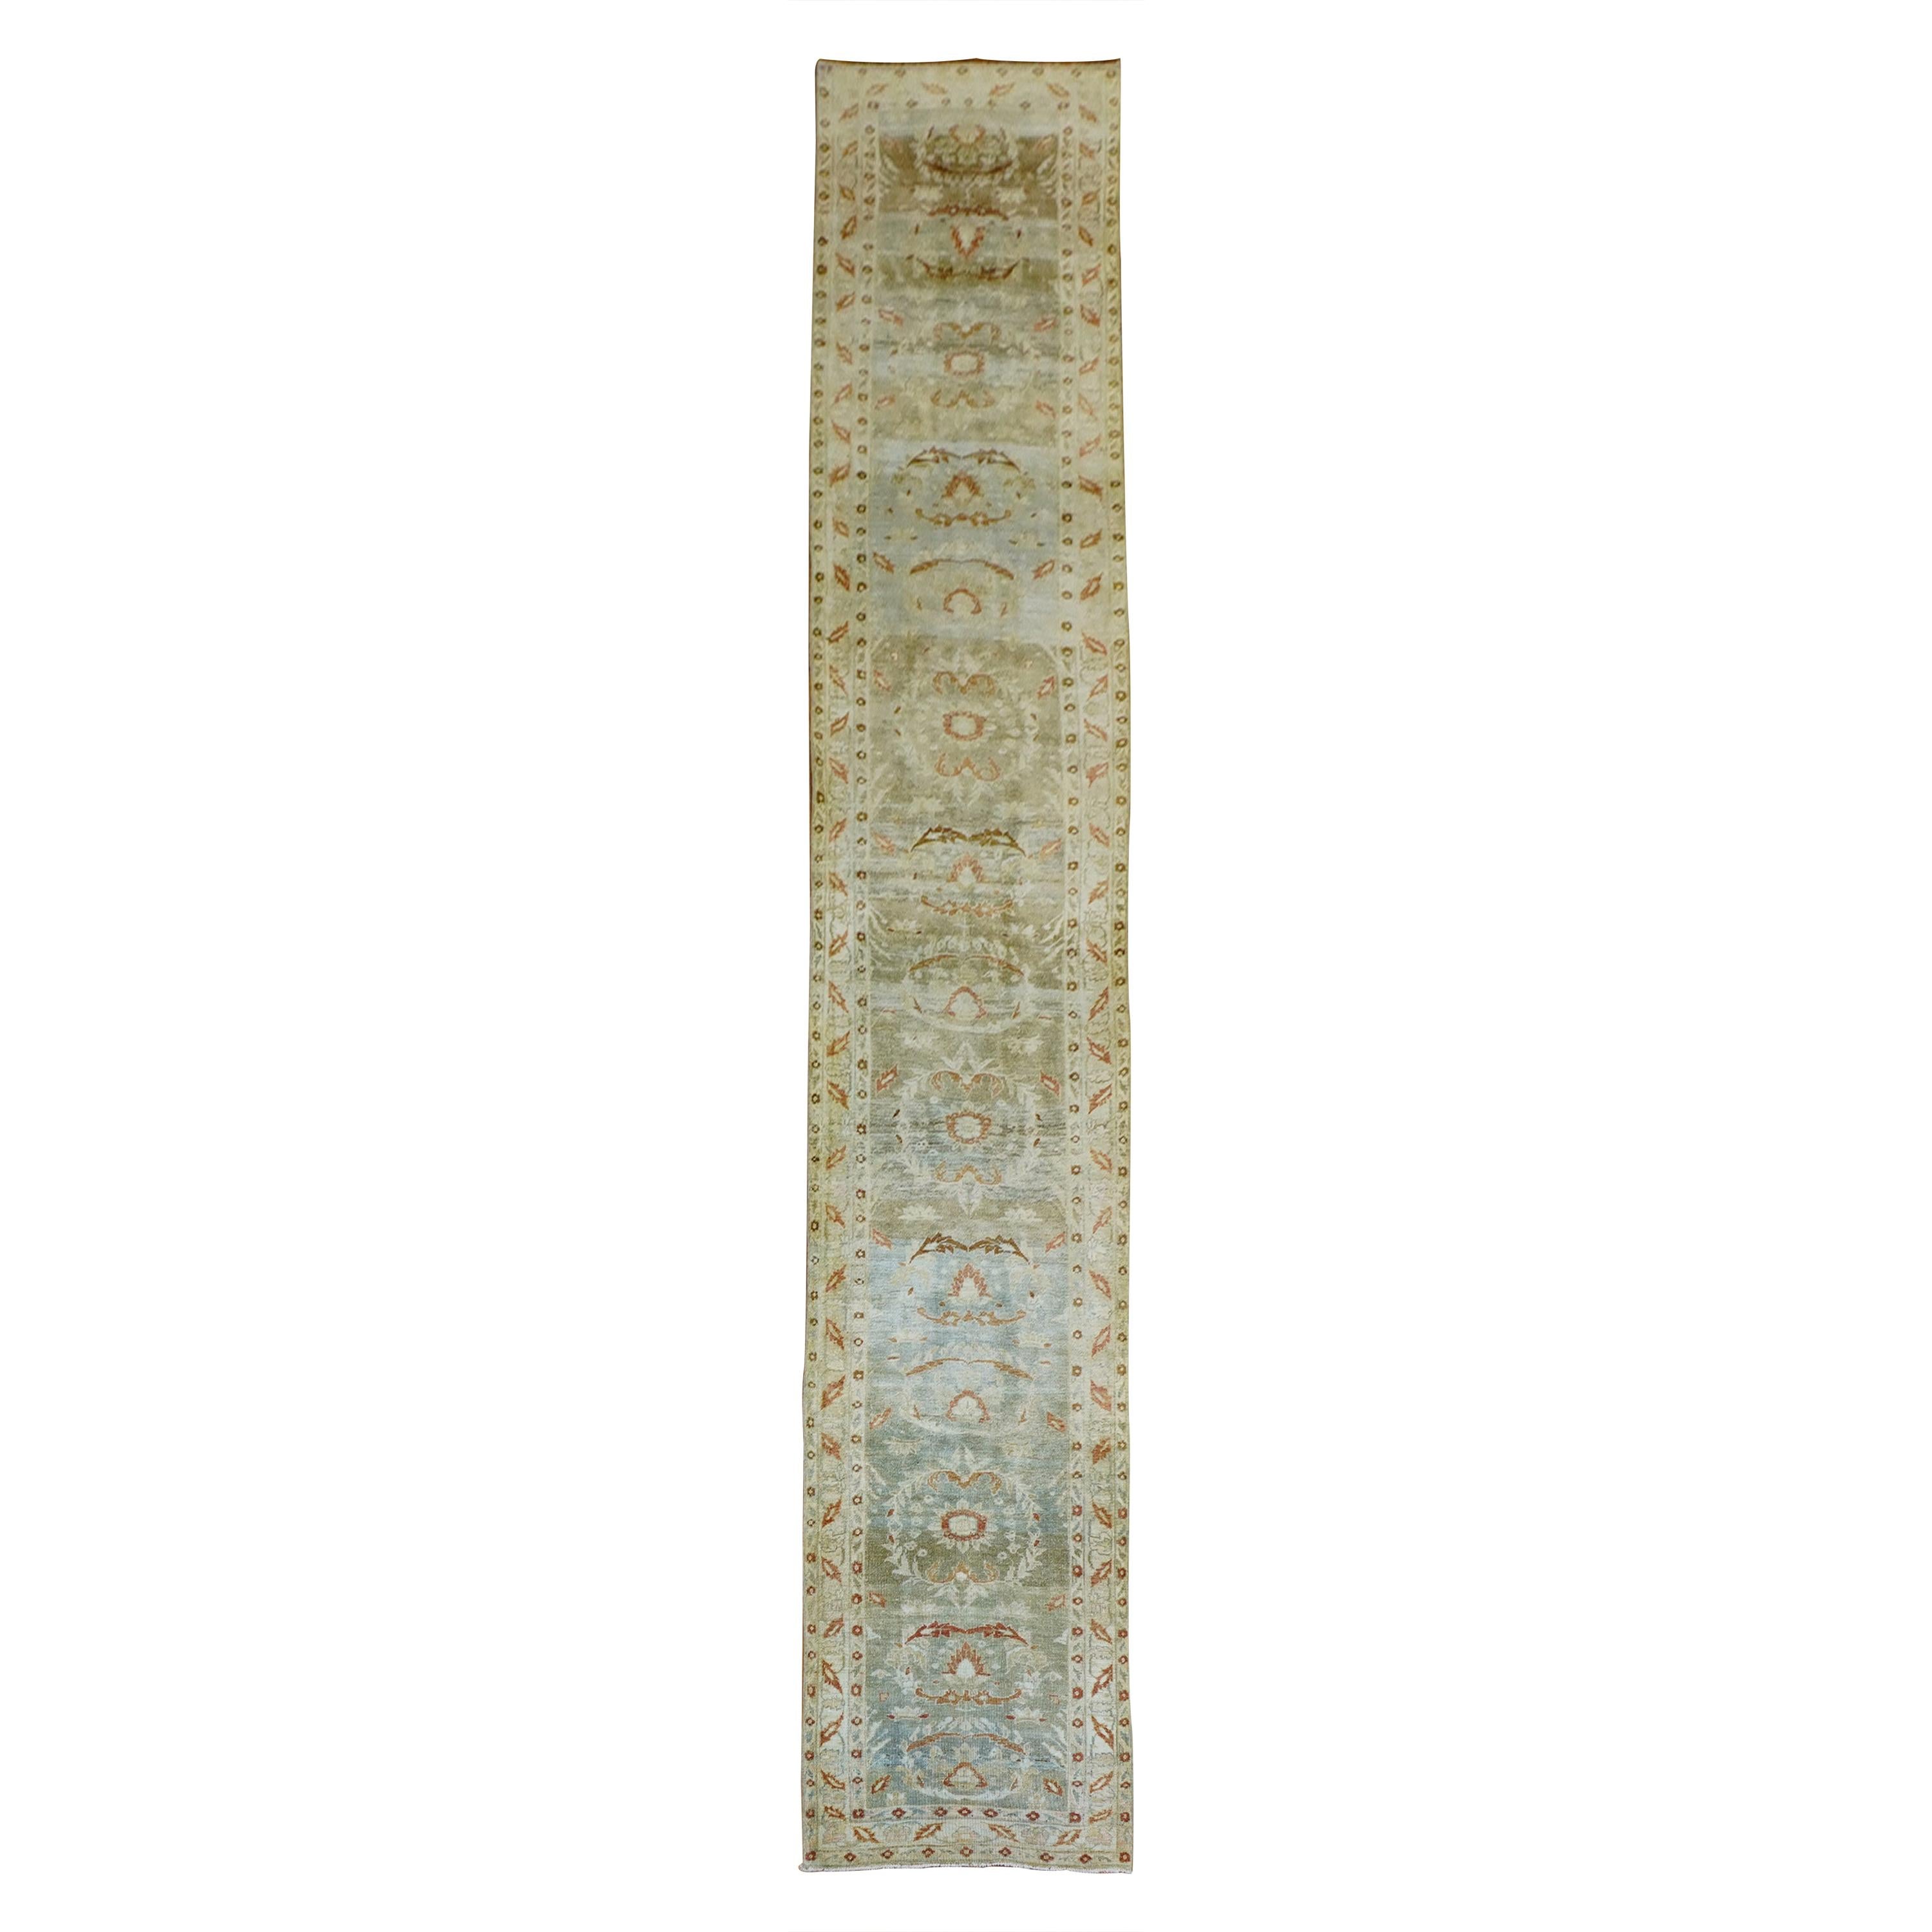 Green Terracotta Long Persian Runner, Early 20th Century For Sale